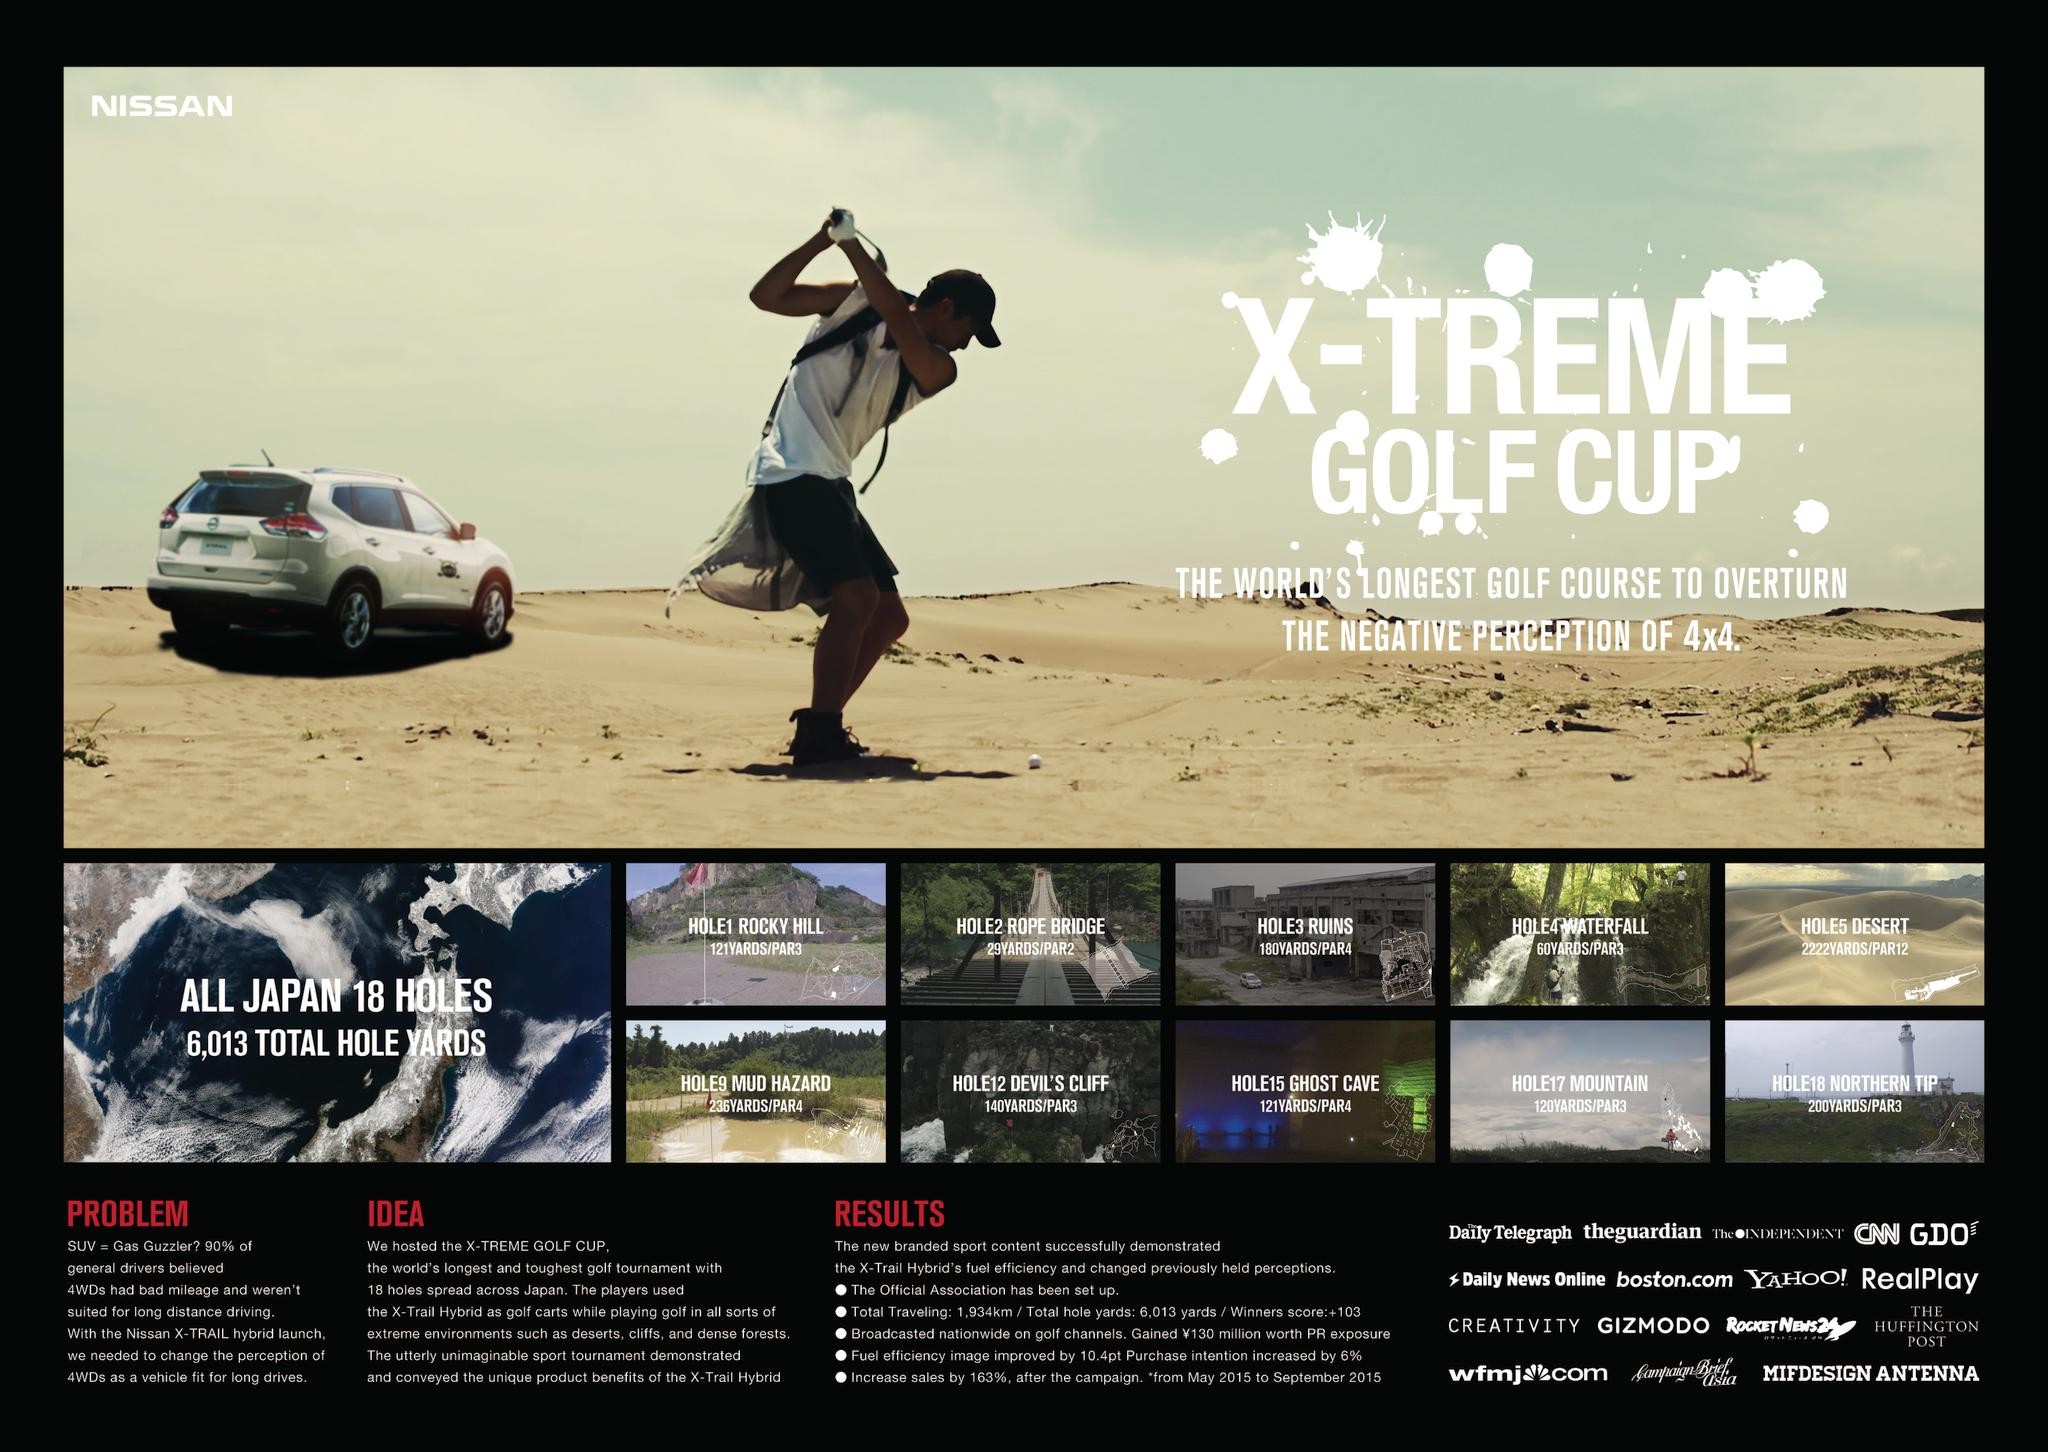 THE X-TREME GOLF CUP